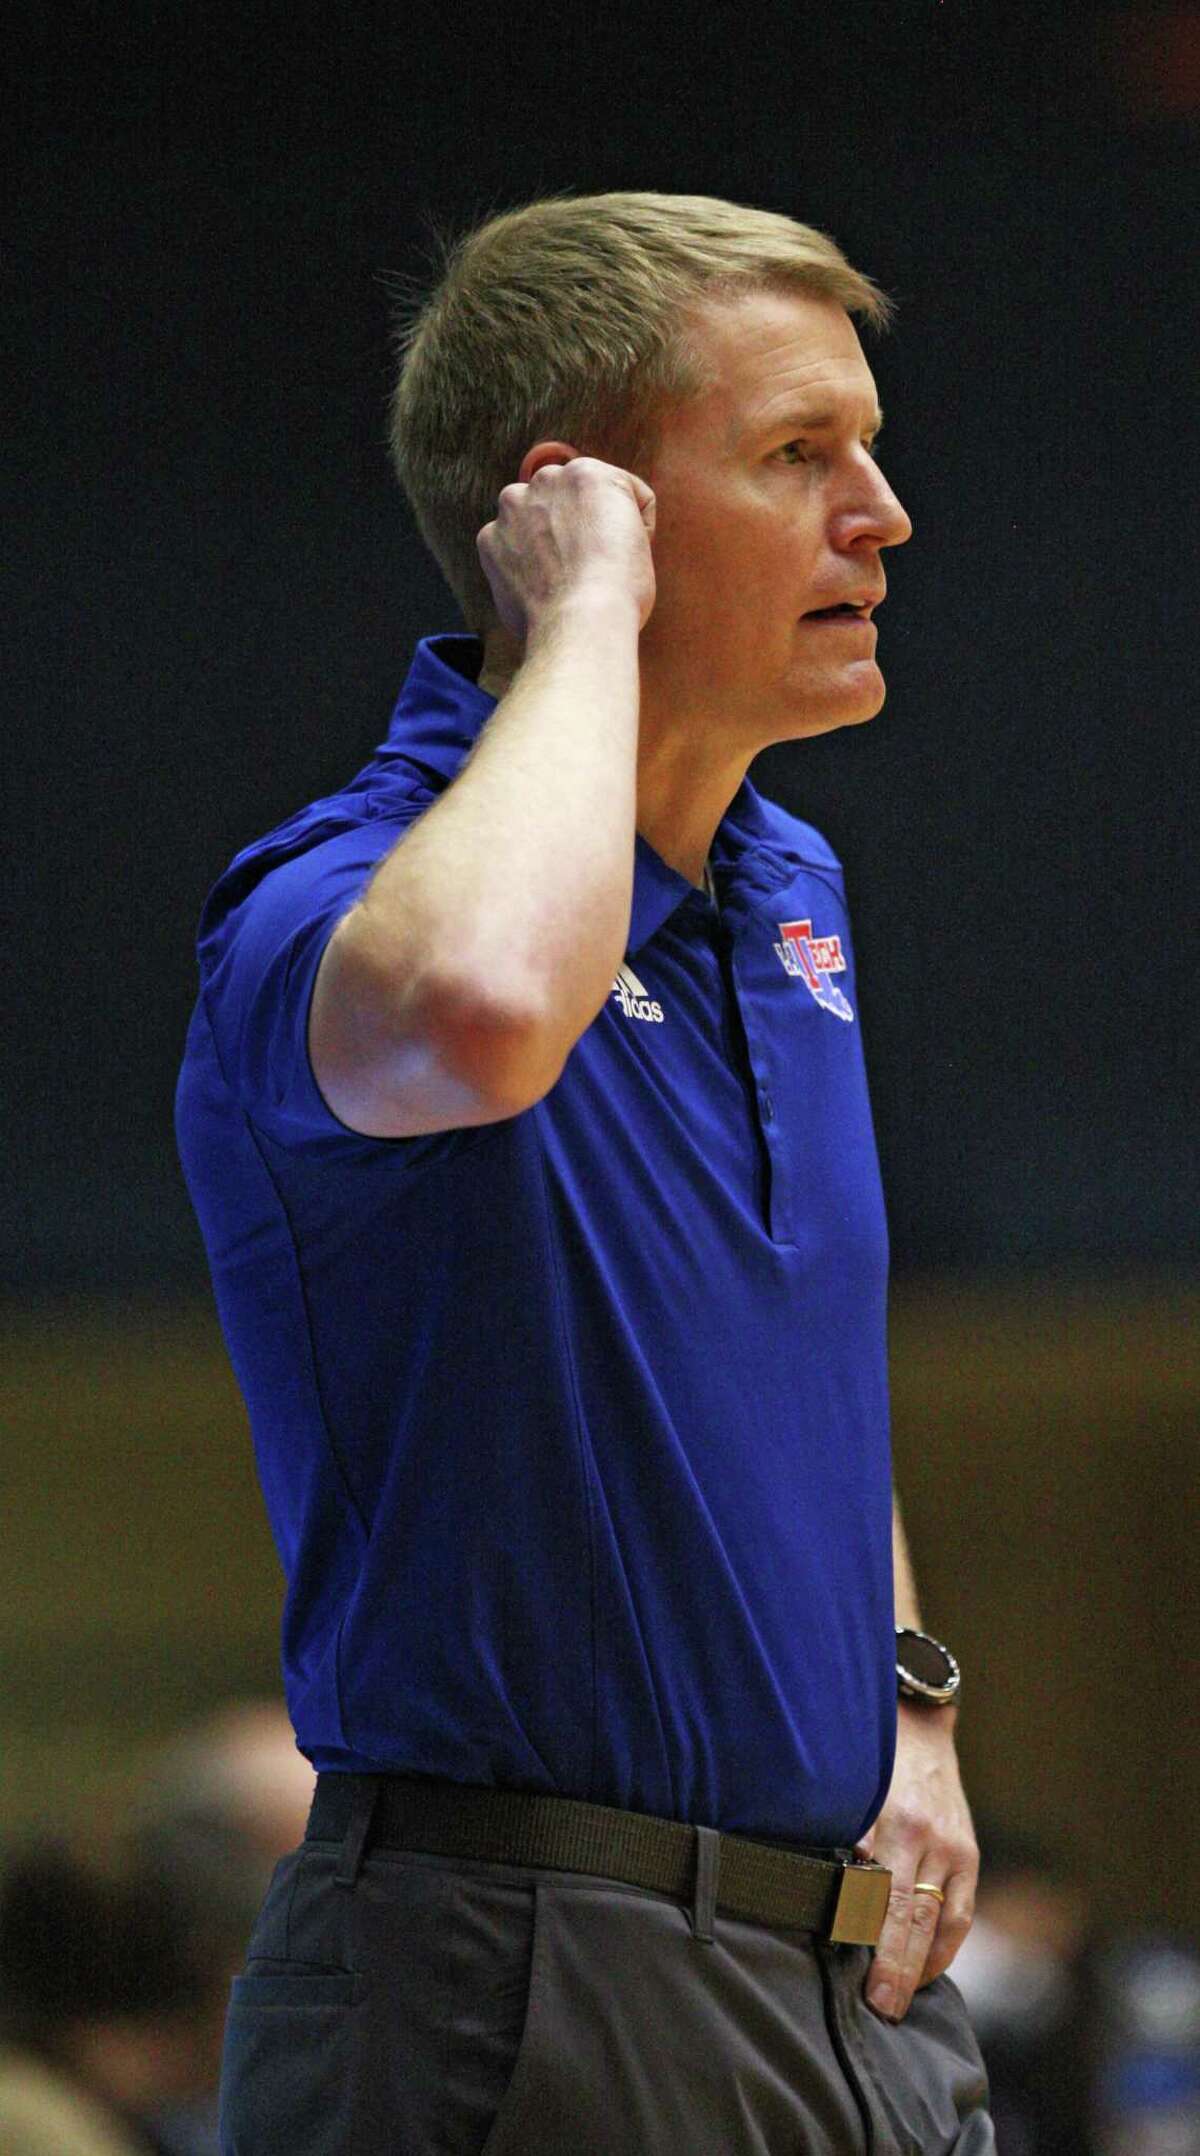 Louisiana Tech head coach Eric Konkol watches on from the sideline during the Conference USA basketball game against UTSA Saturday, Jan. 8, 2022, at the UTSA Convocation Center in San Antonio, Texas.